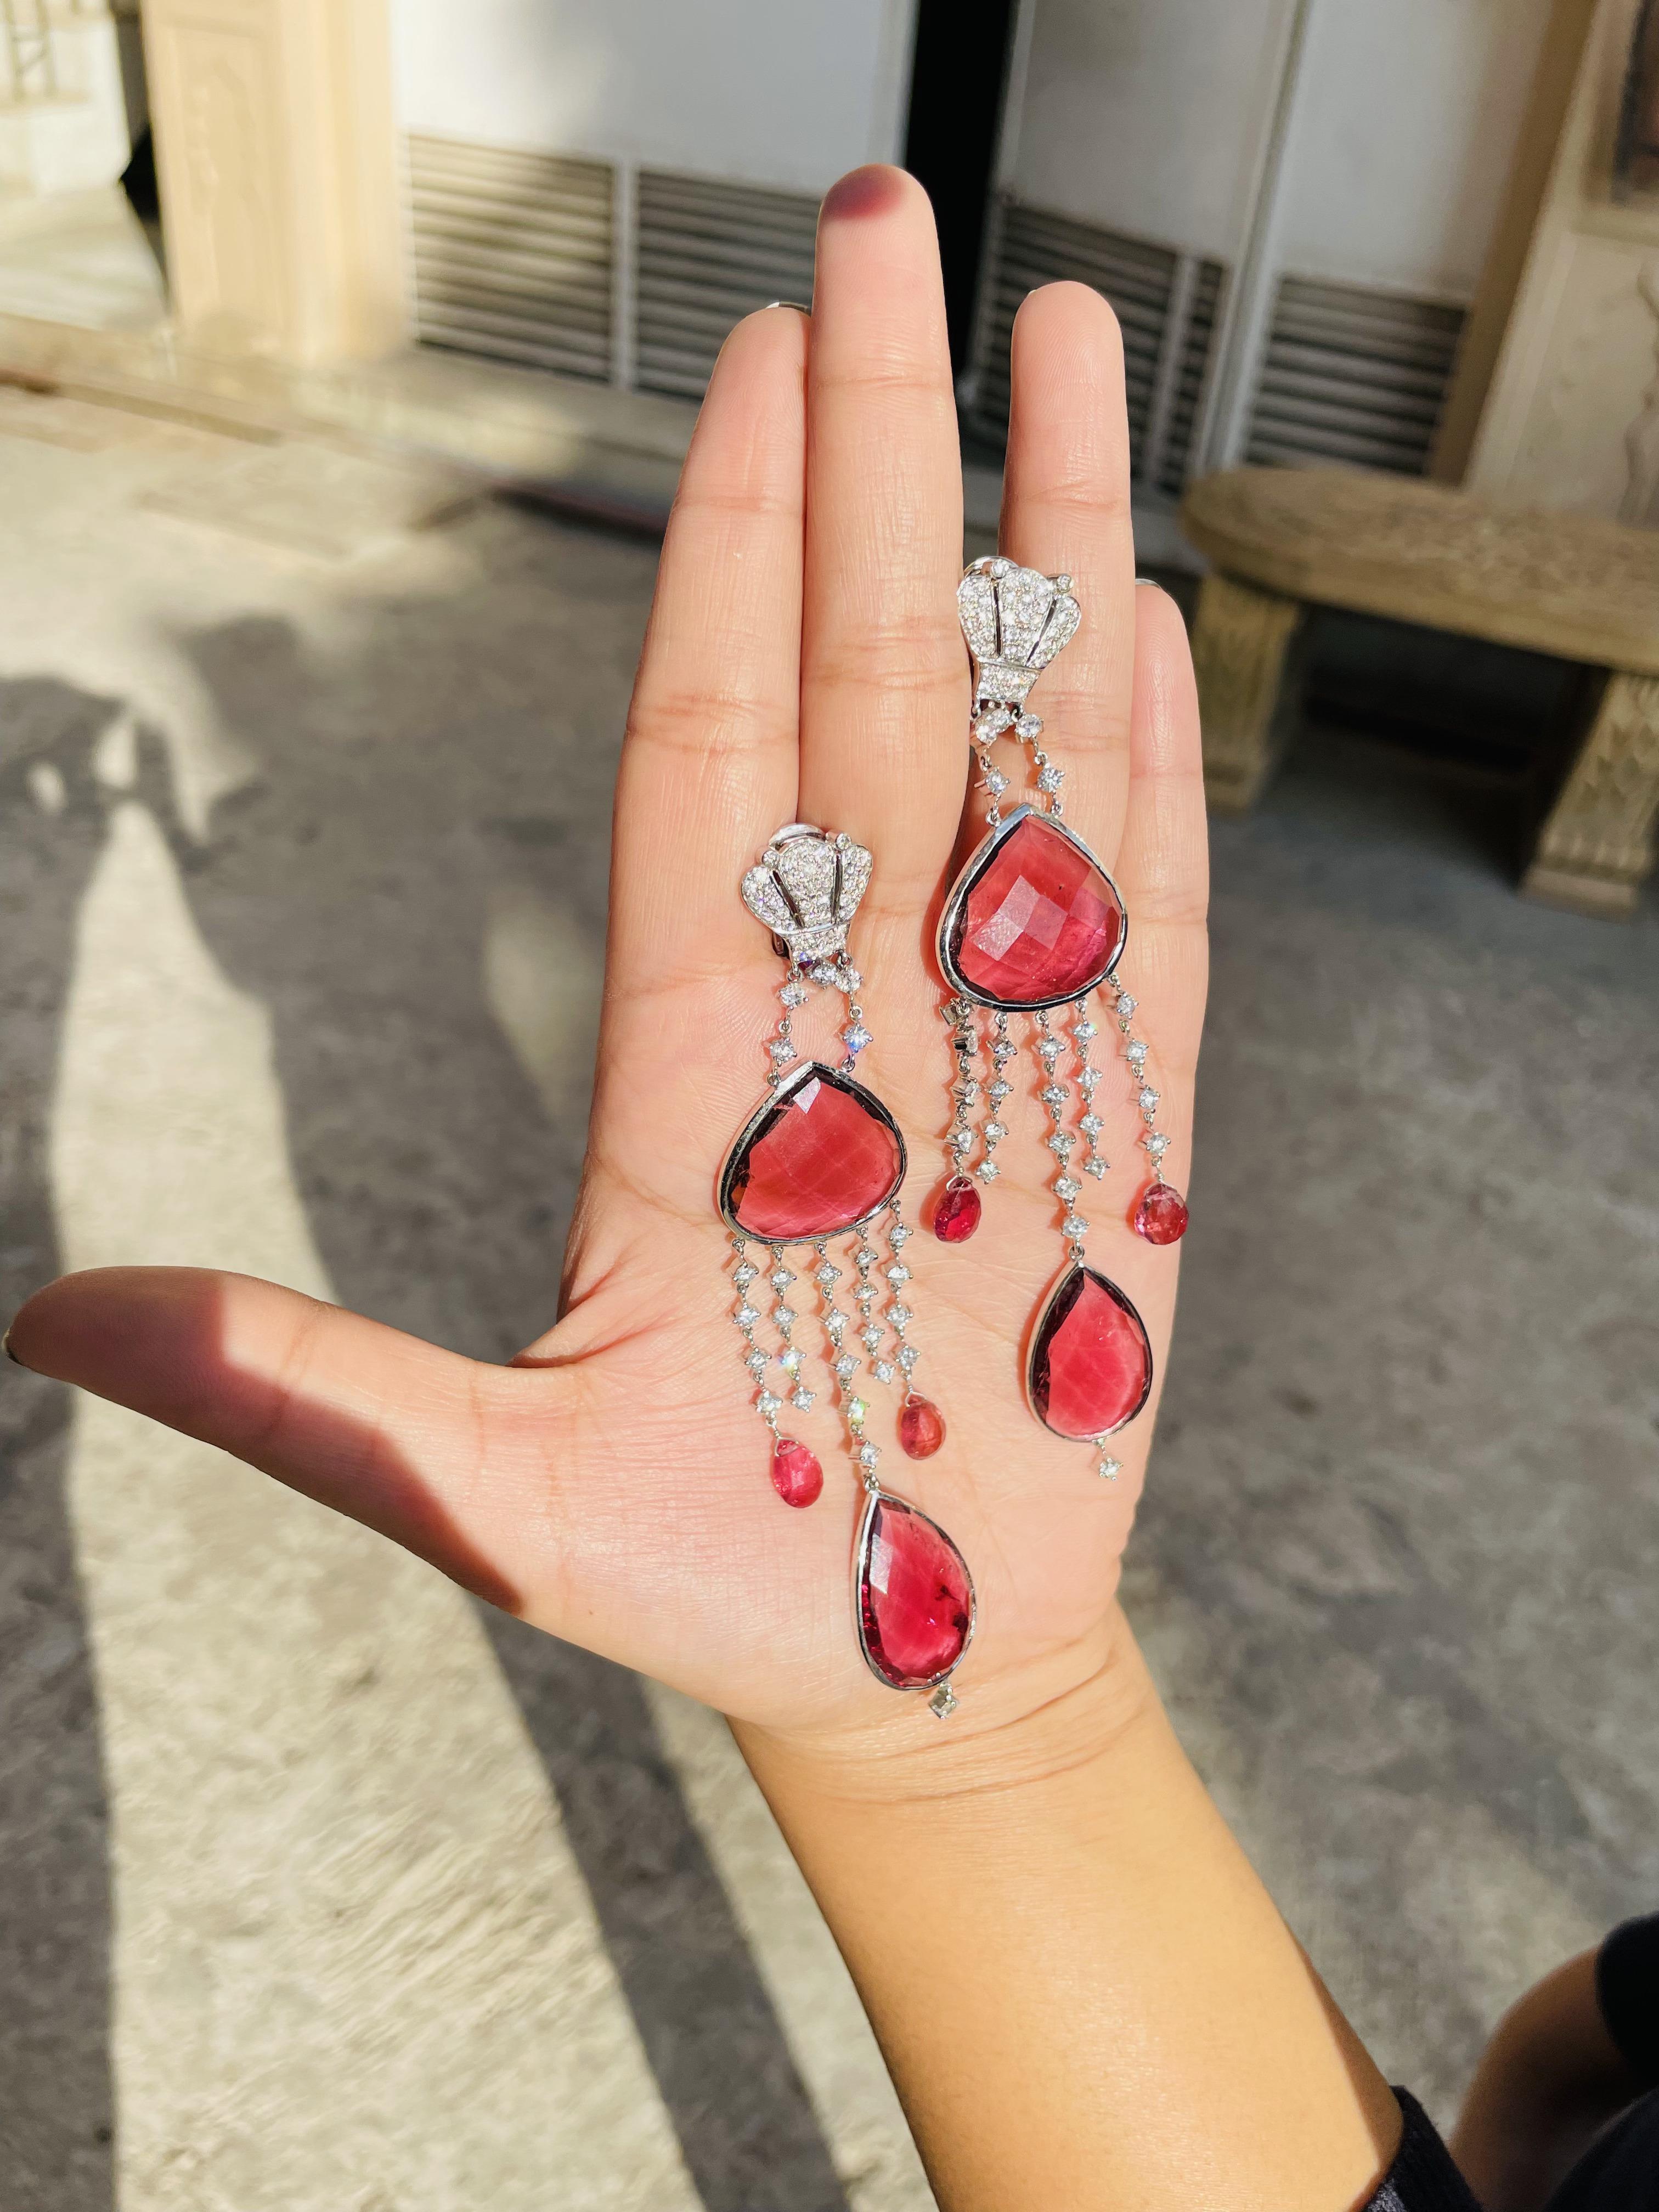 Ruby Dangle earrings to make a statement with your look. These earrings create a sparkling, luxurious look featuring mixed cut gemstone.
If you love to gravitate towards unique styles, this piece of jewelry is perfect for you.

PRODUCT DETAILS :-

>